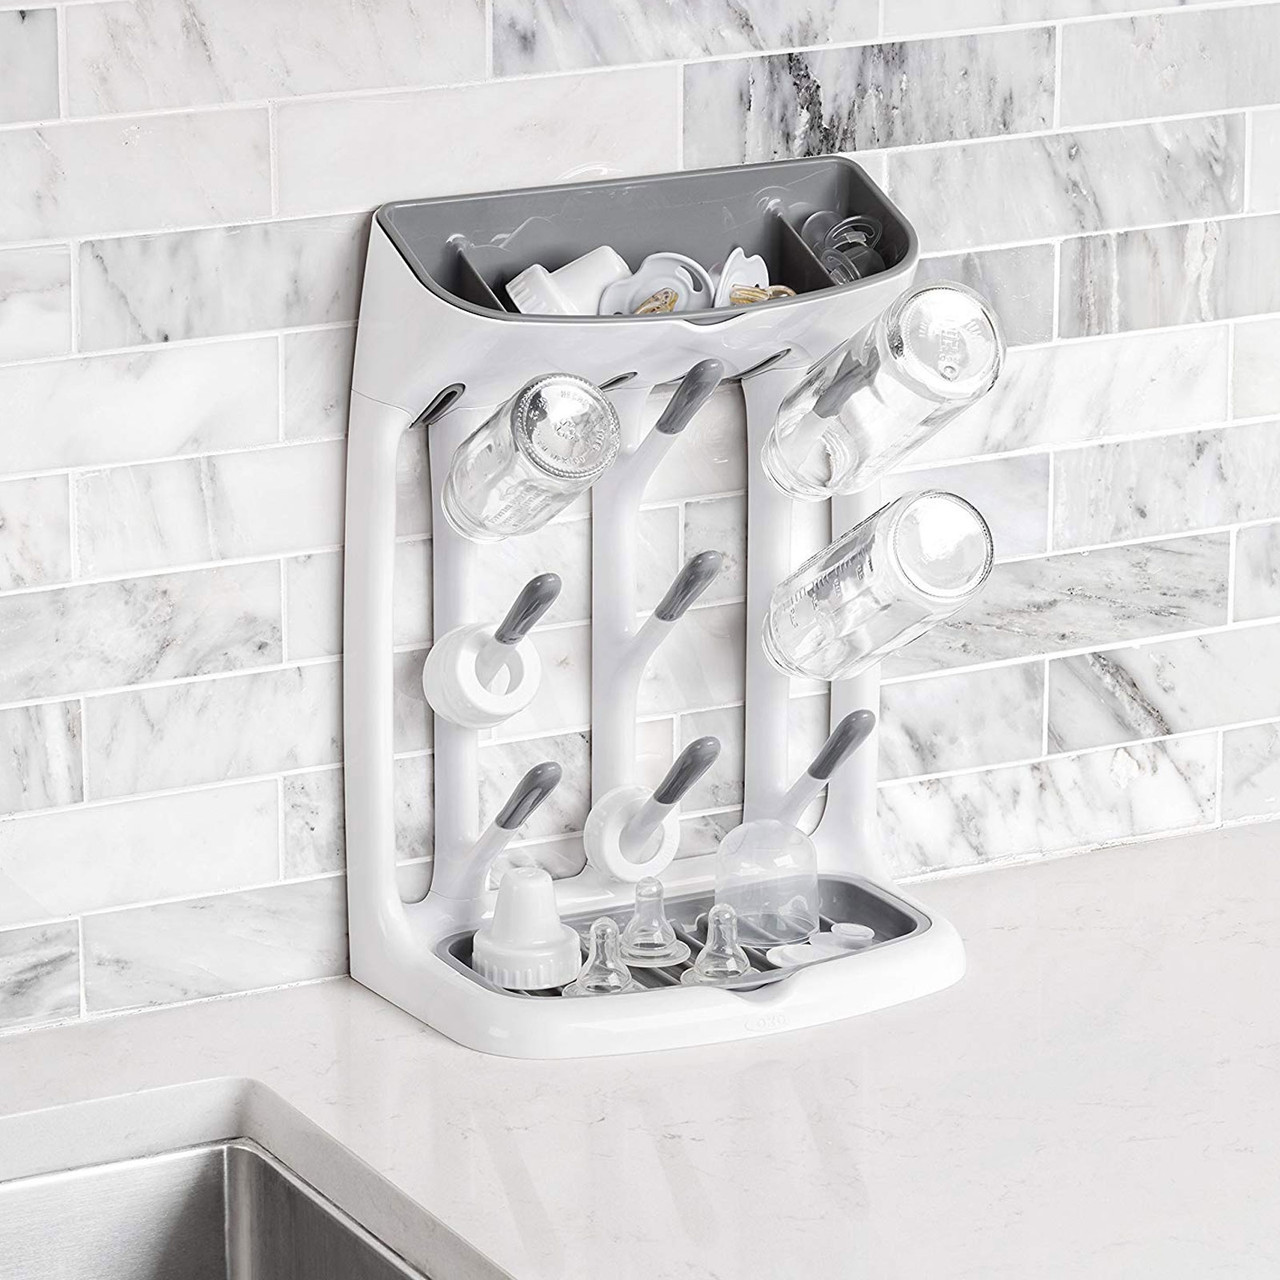 https://cdn11.bigcommerce.com/s-fh6ws/images/stencil/1280x1280/products/3594/14271/Oxo_Tot_Space_Saving_Peg_Bottle_Drying_Rack__67146.1631842305.jpg?c=3